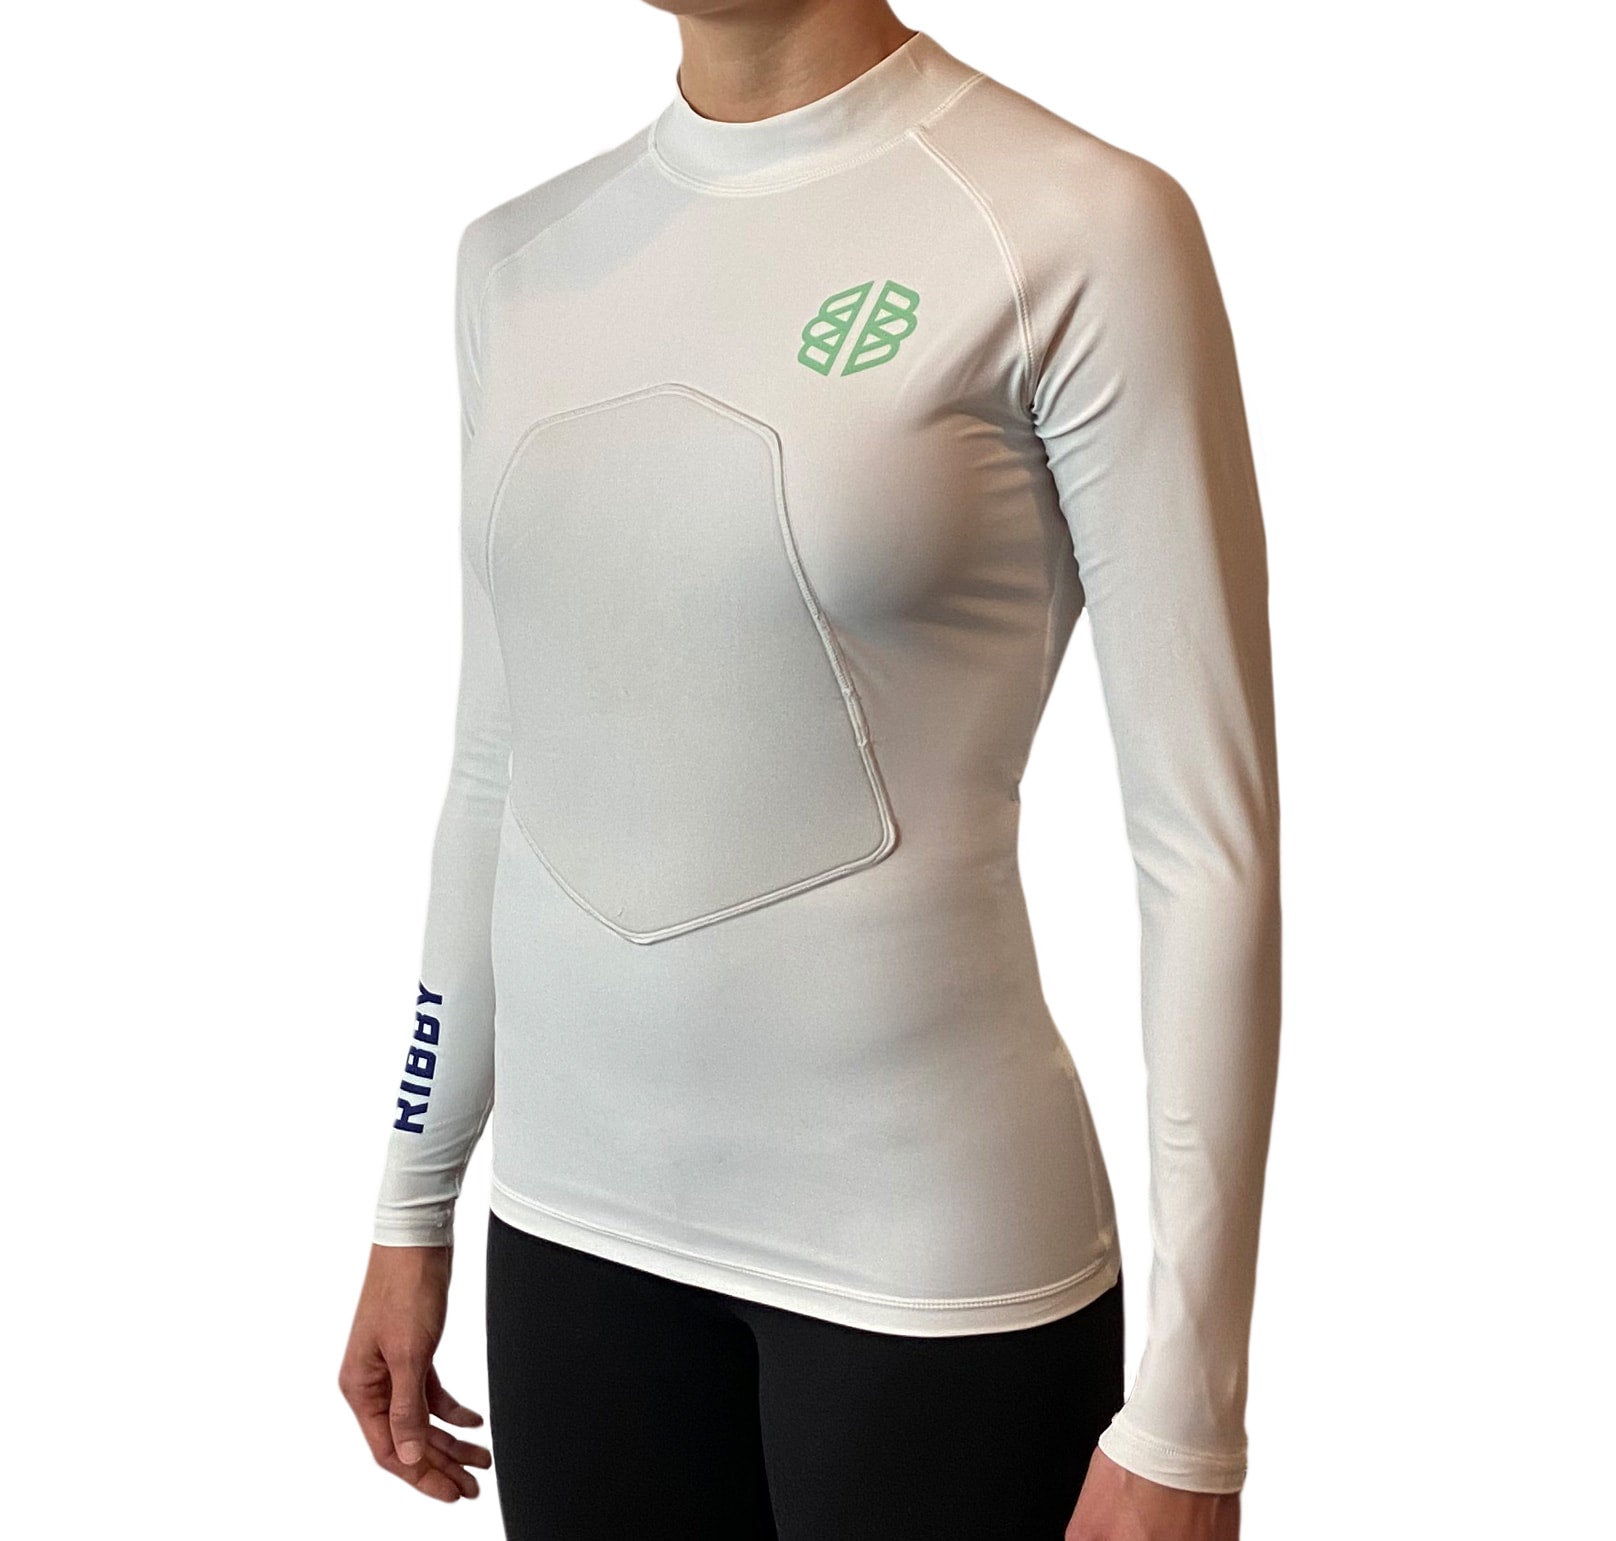 About our padded rash guard